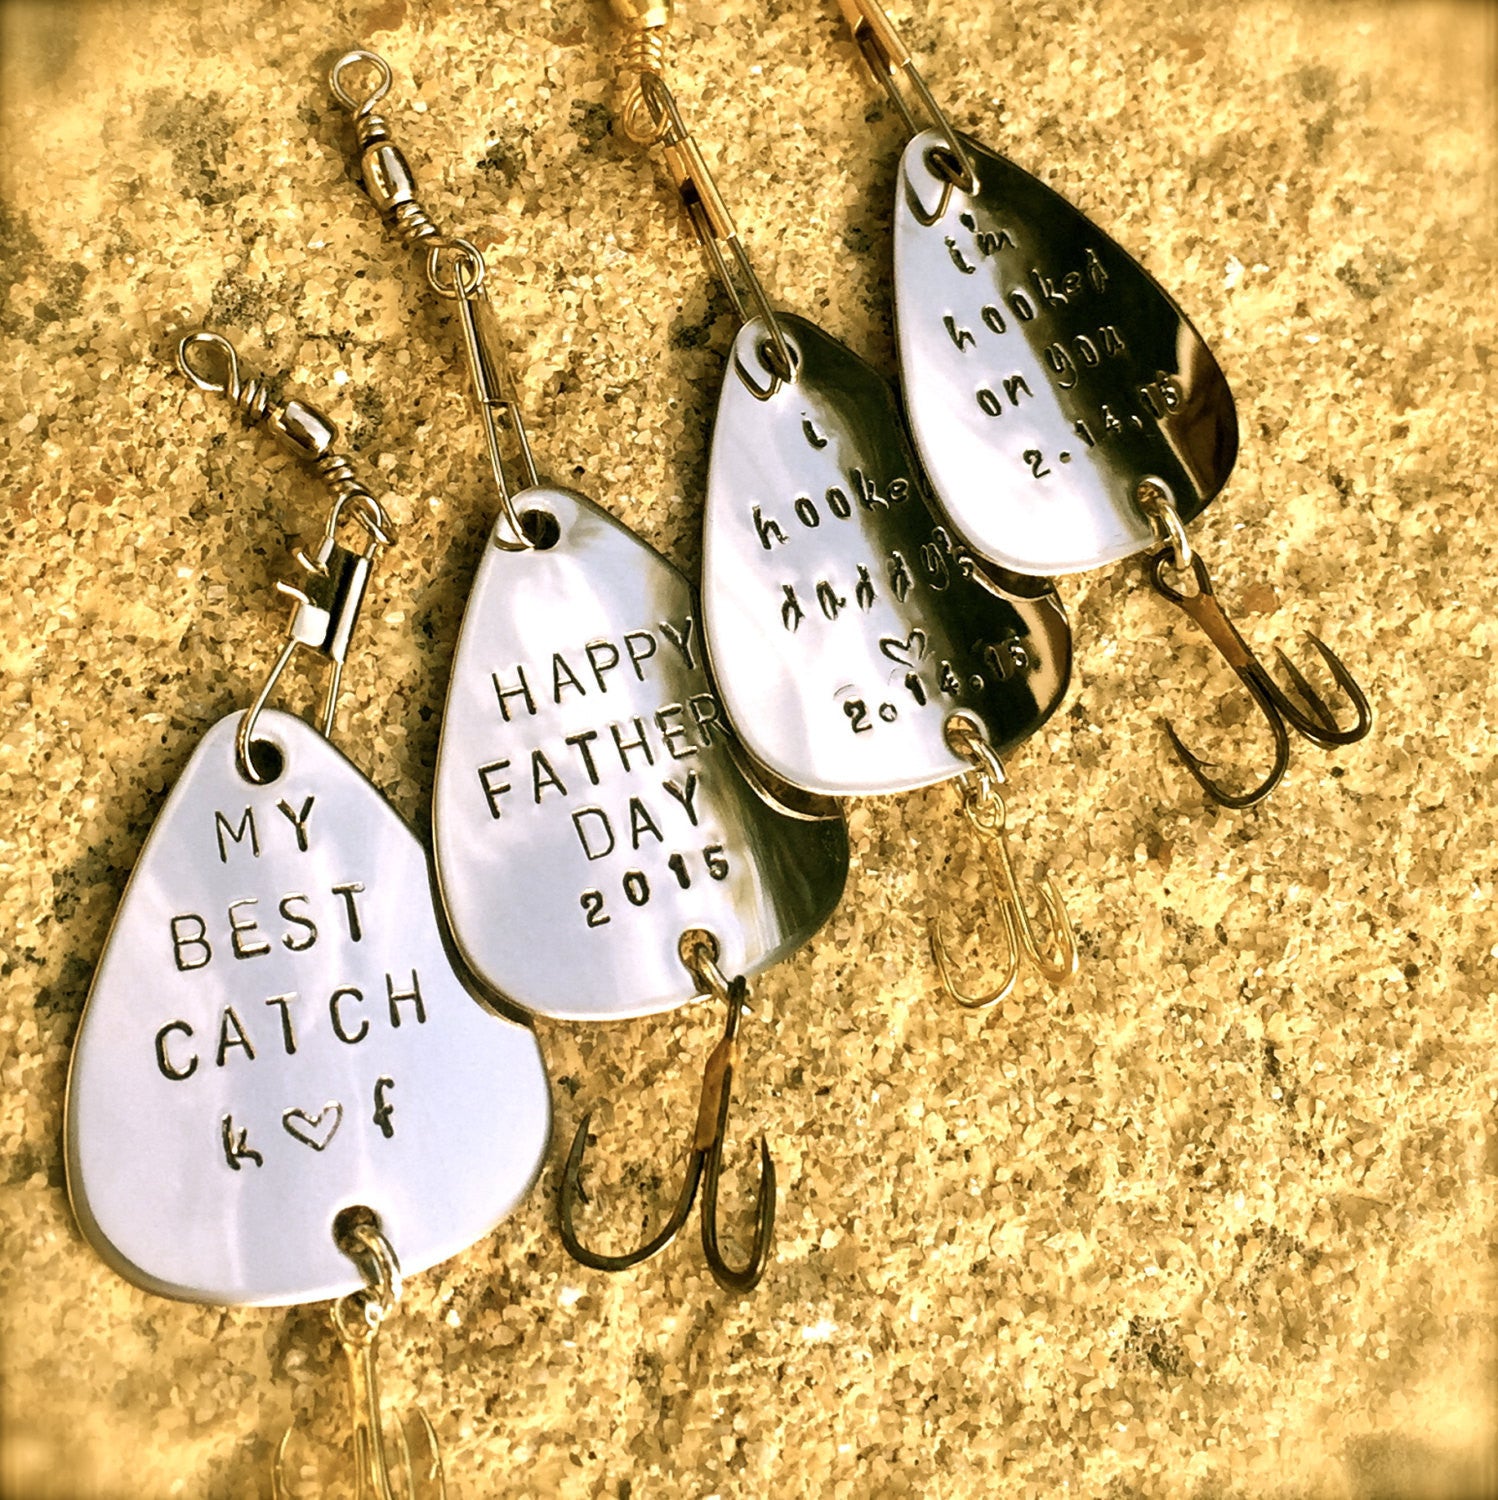 Personalized Fishing Lure, Hooked On Daddy Fishing Lure - Natashaaloha, jewelry, bracelets, necklace, keychains, fishing lures, gifts for men, charms, personalized, 